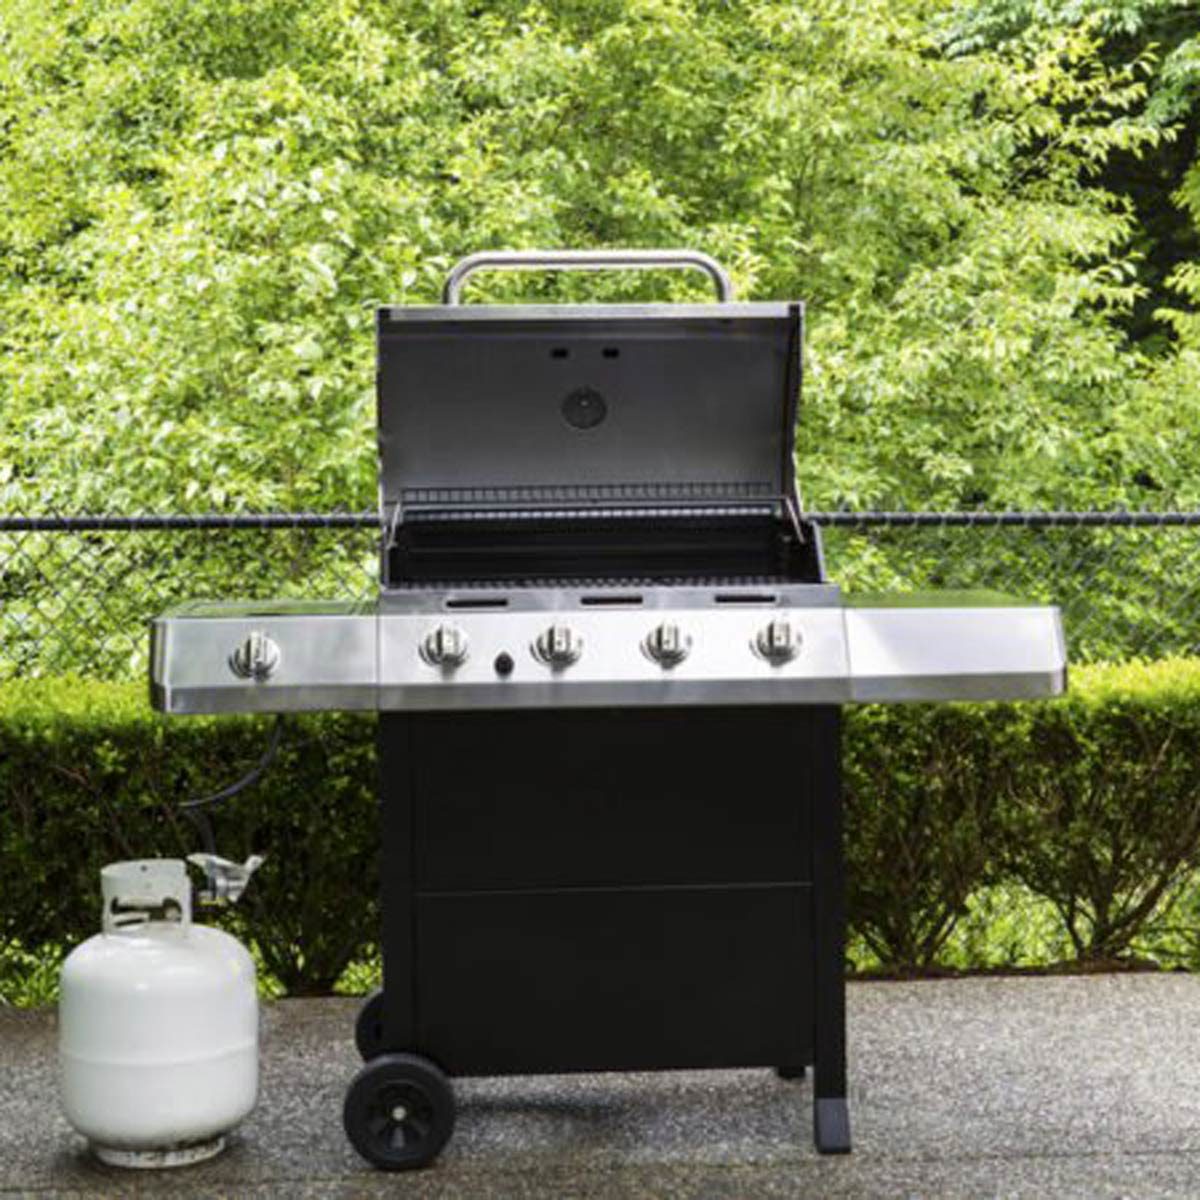 How to Start a Stubborn Gas Grill